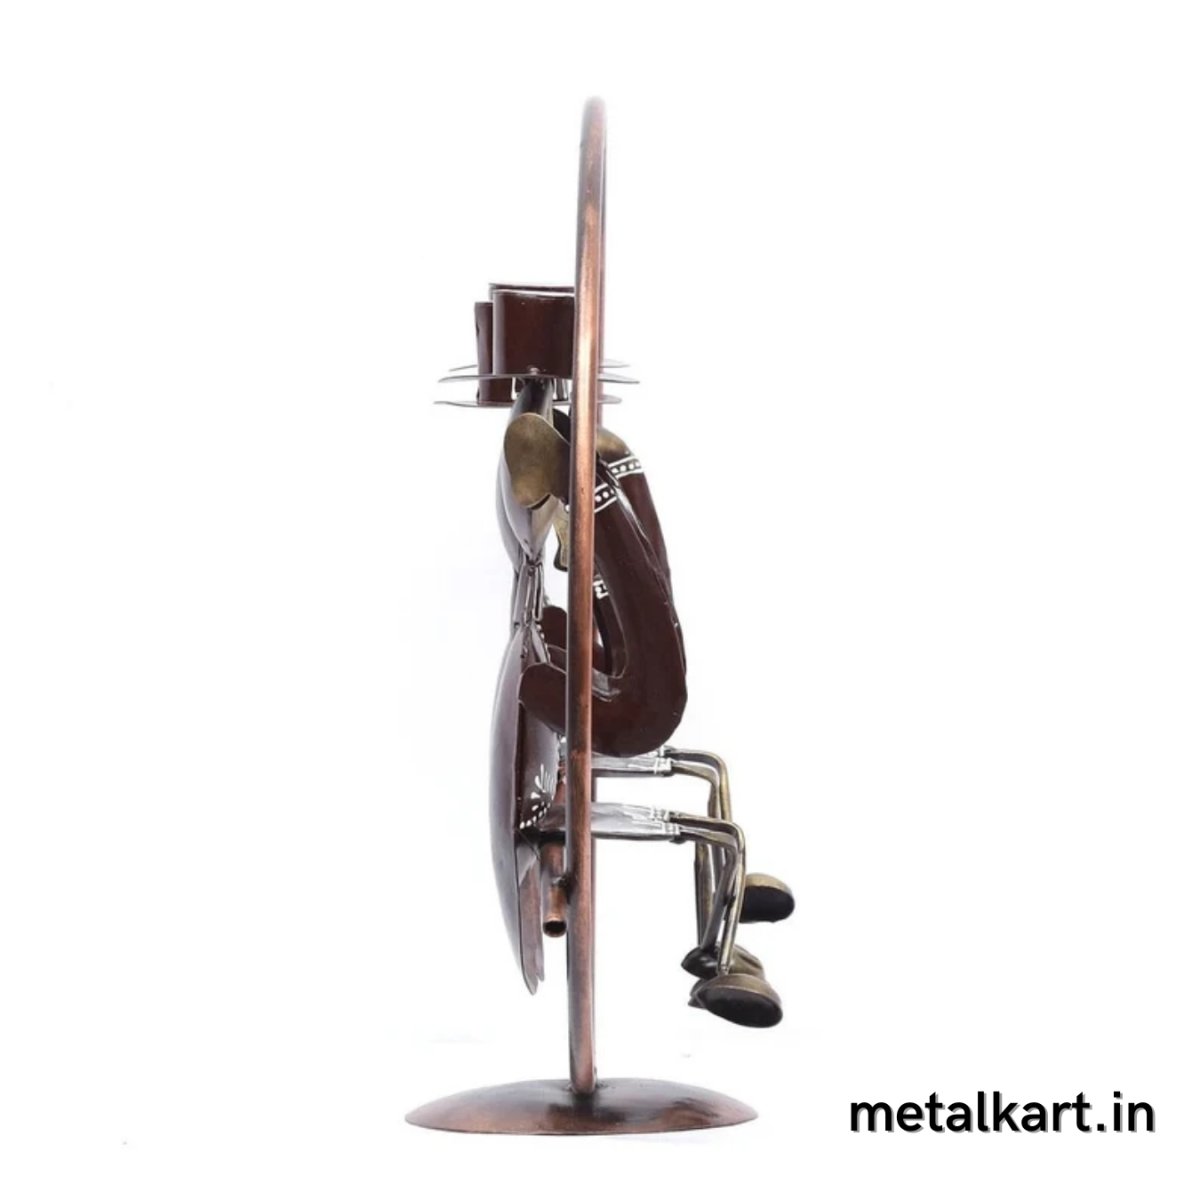 Metalkart Special World of Gandhiji's Three Monkeys For Table top (17*6*17 Inches approx)